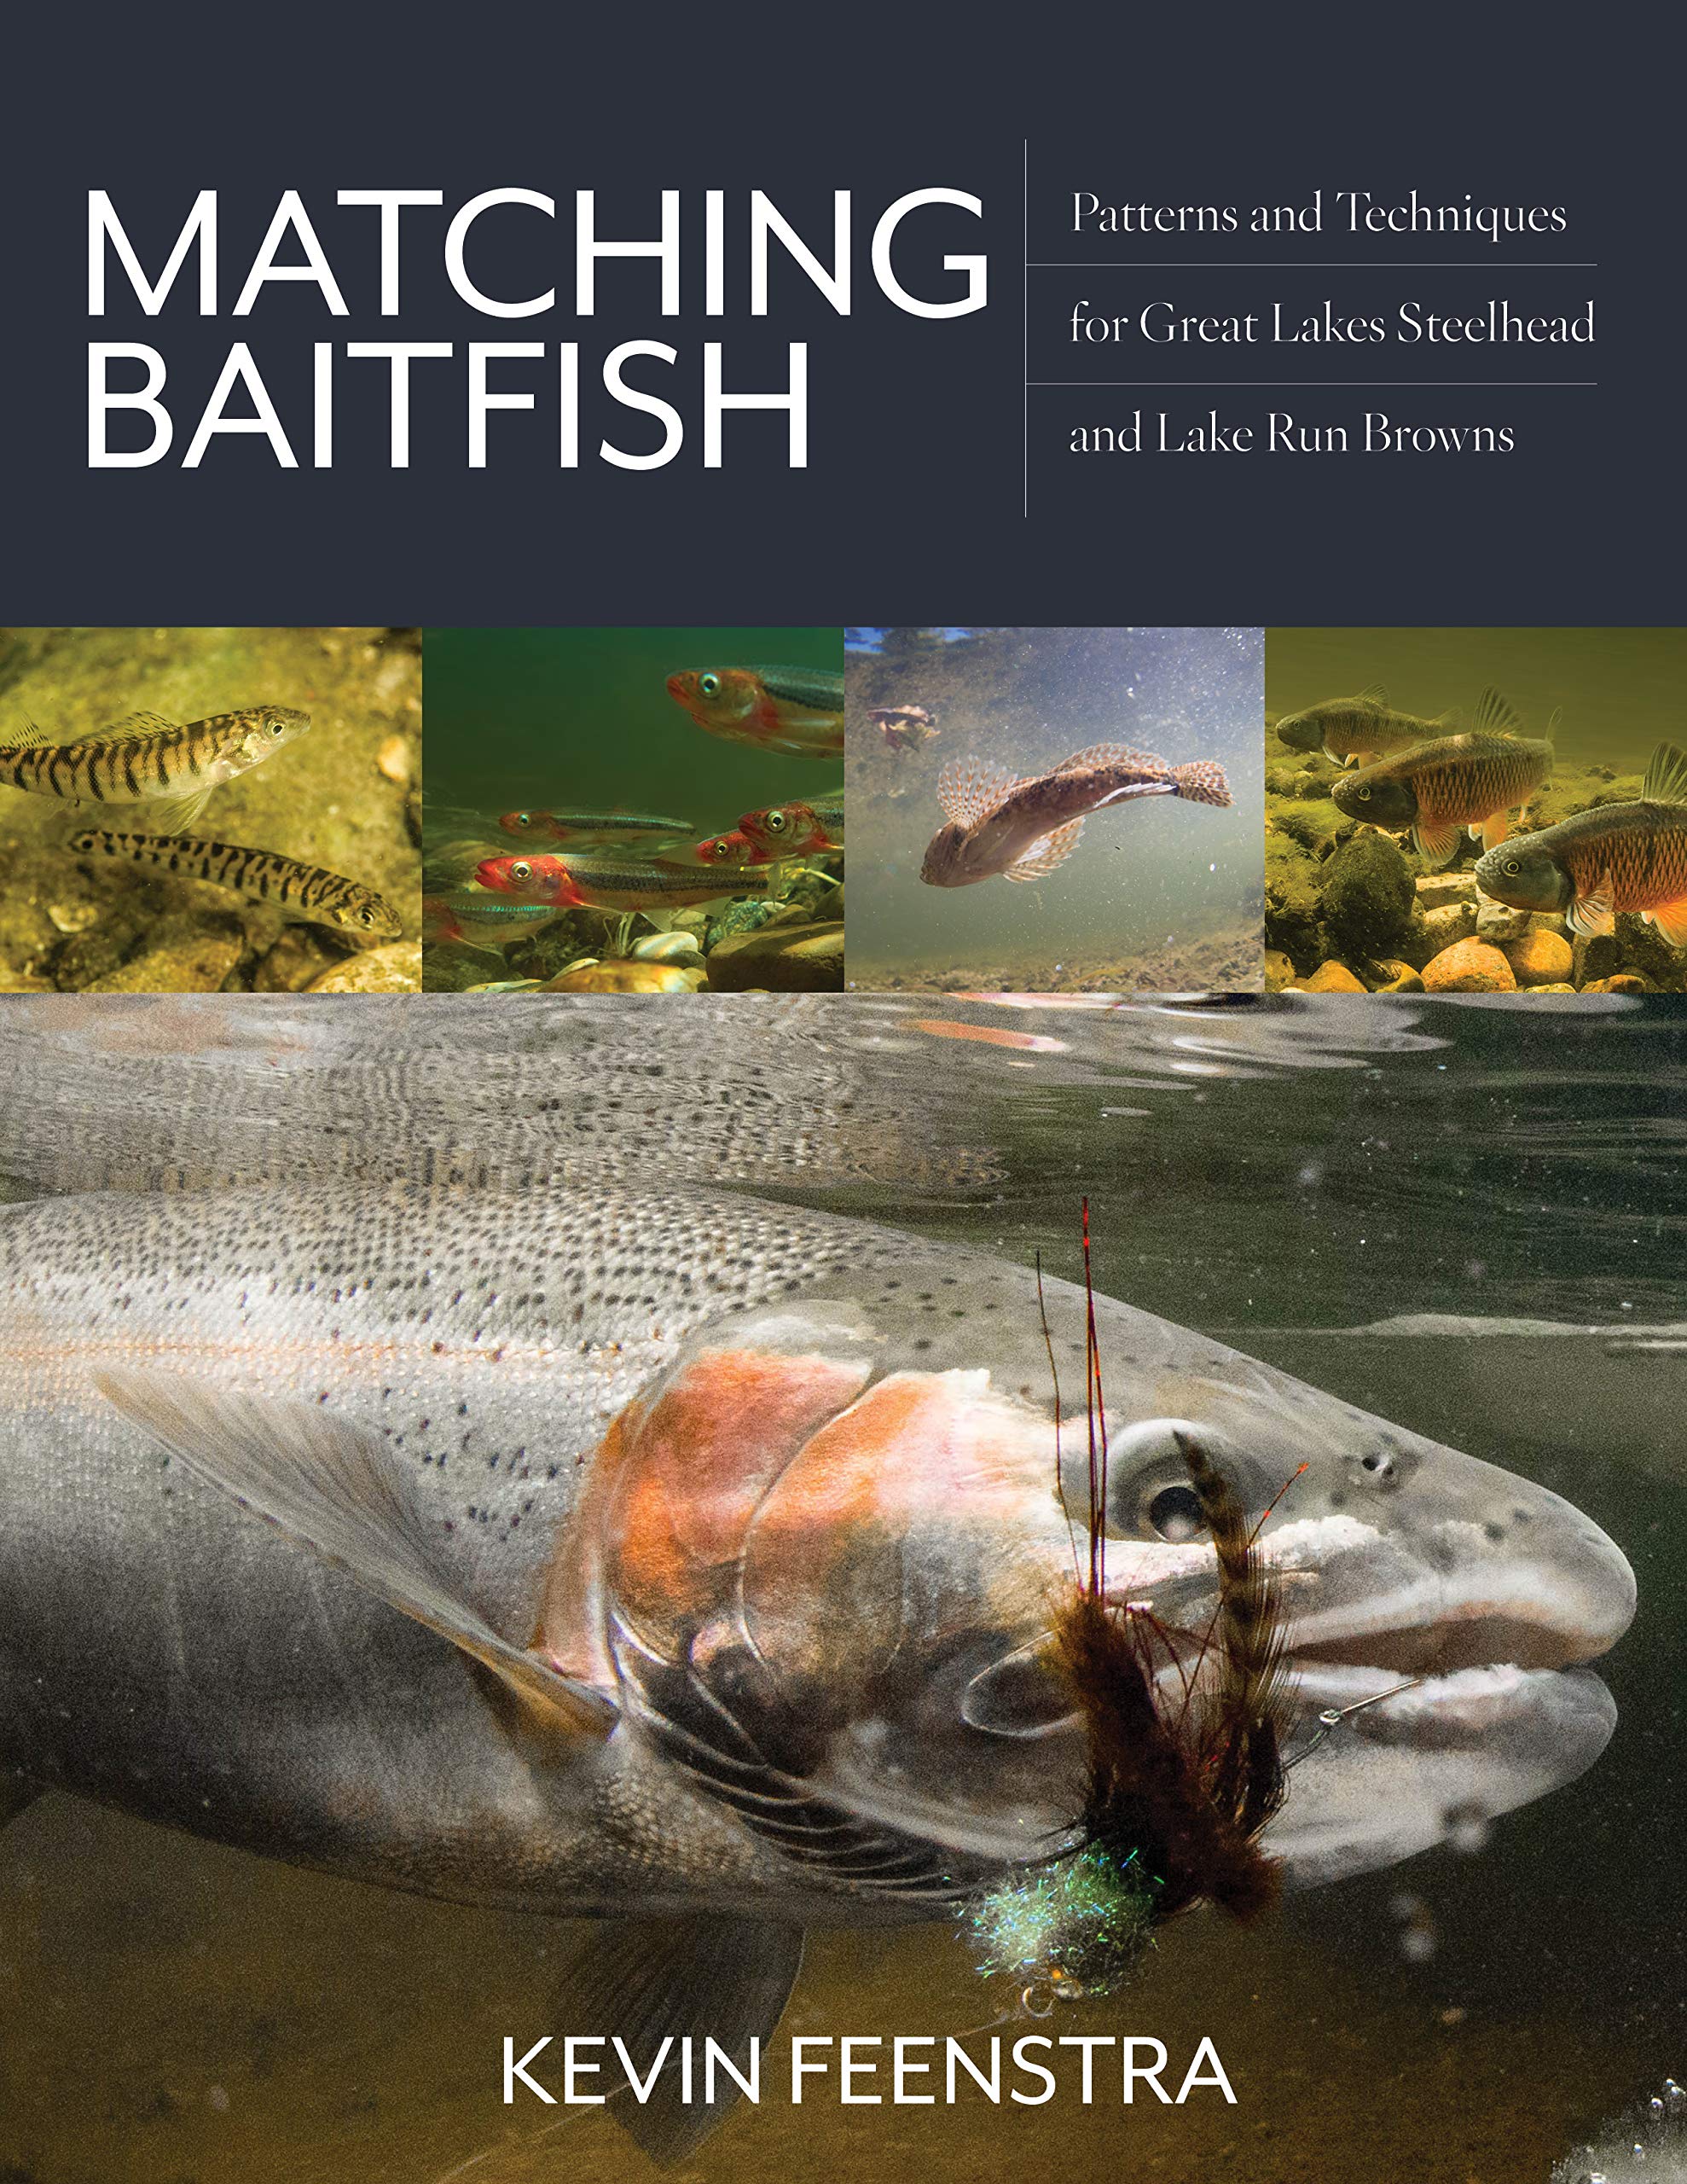 Matching Baitfish: Patterns and Techniques for Great Lakes Steelhead and Lake Run Browns By Kevin Feenstra